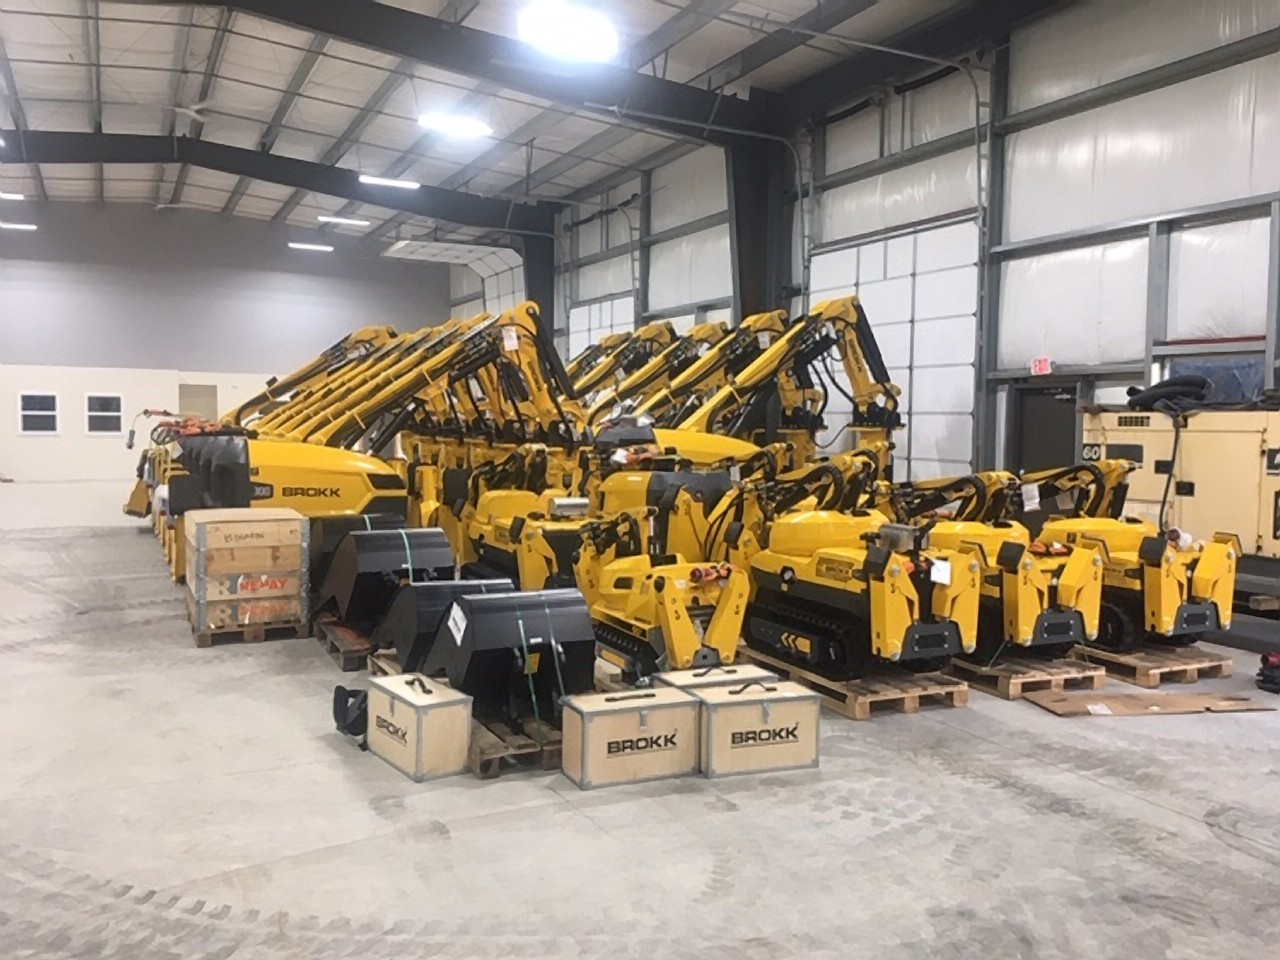 Brokk Inc. Relocates Stanhope Facility for Increased Inventory and Services